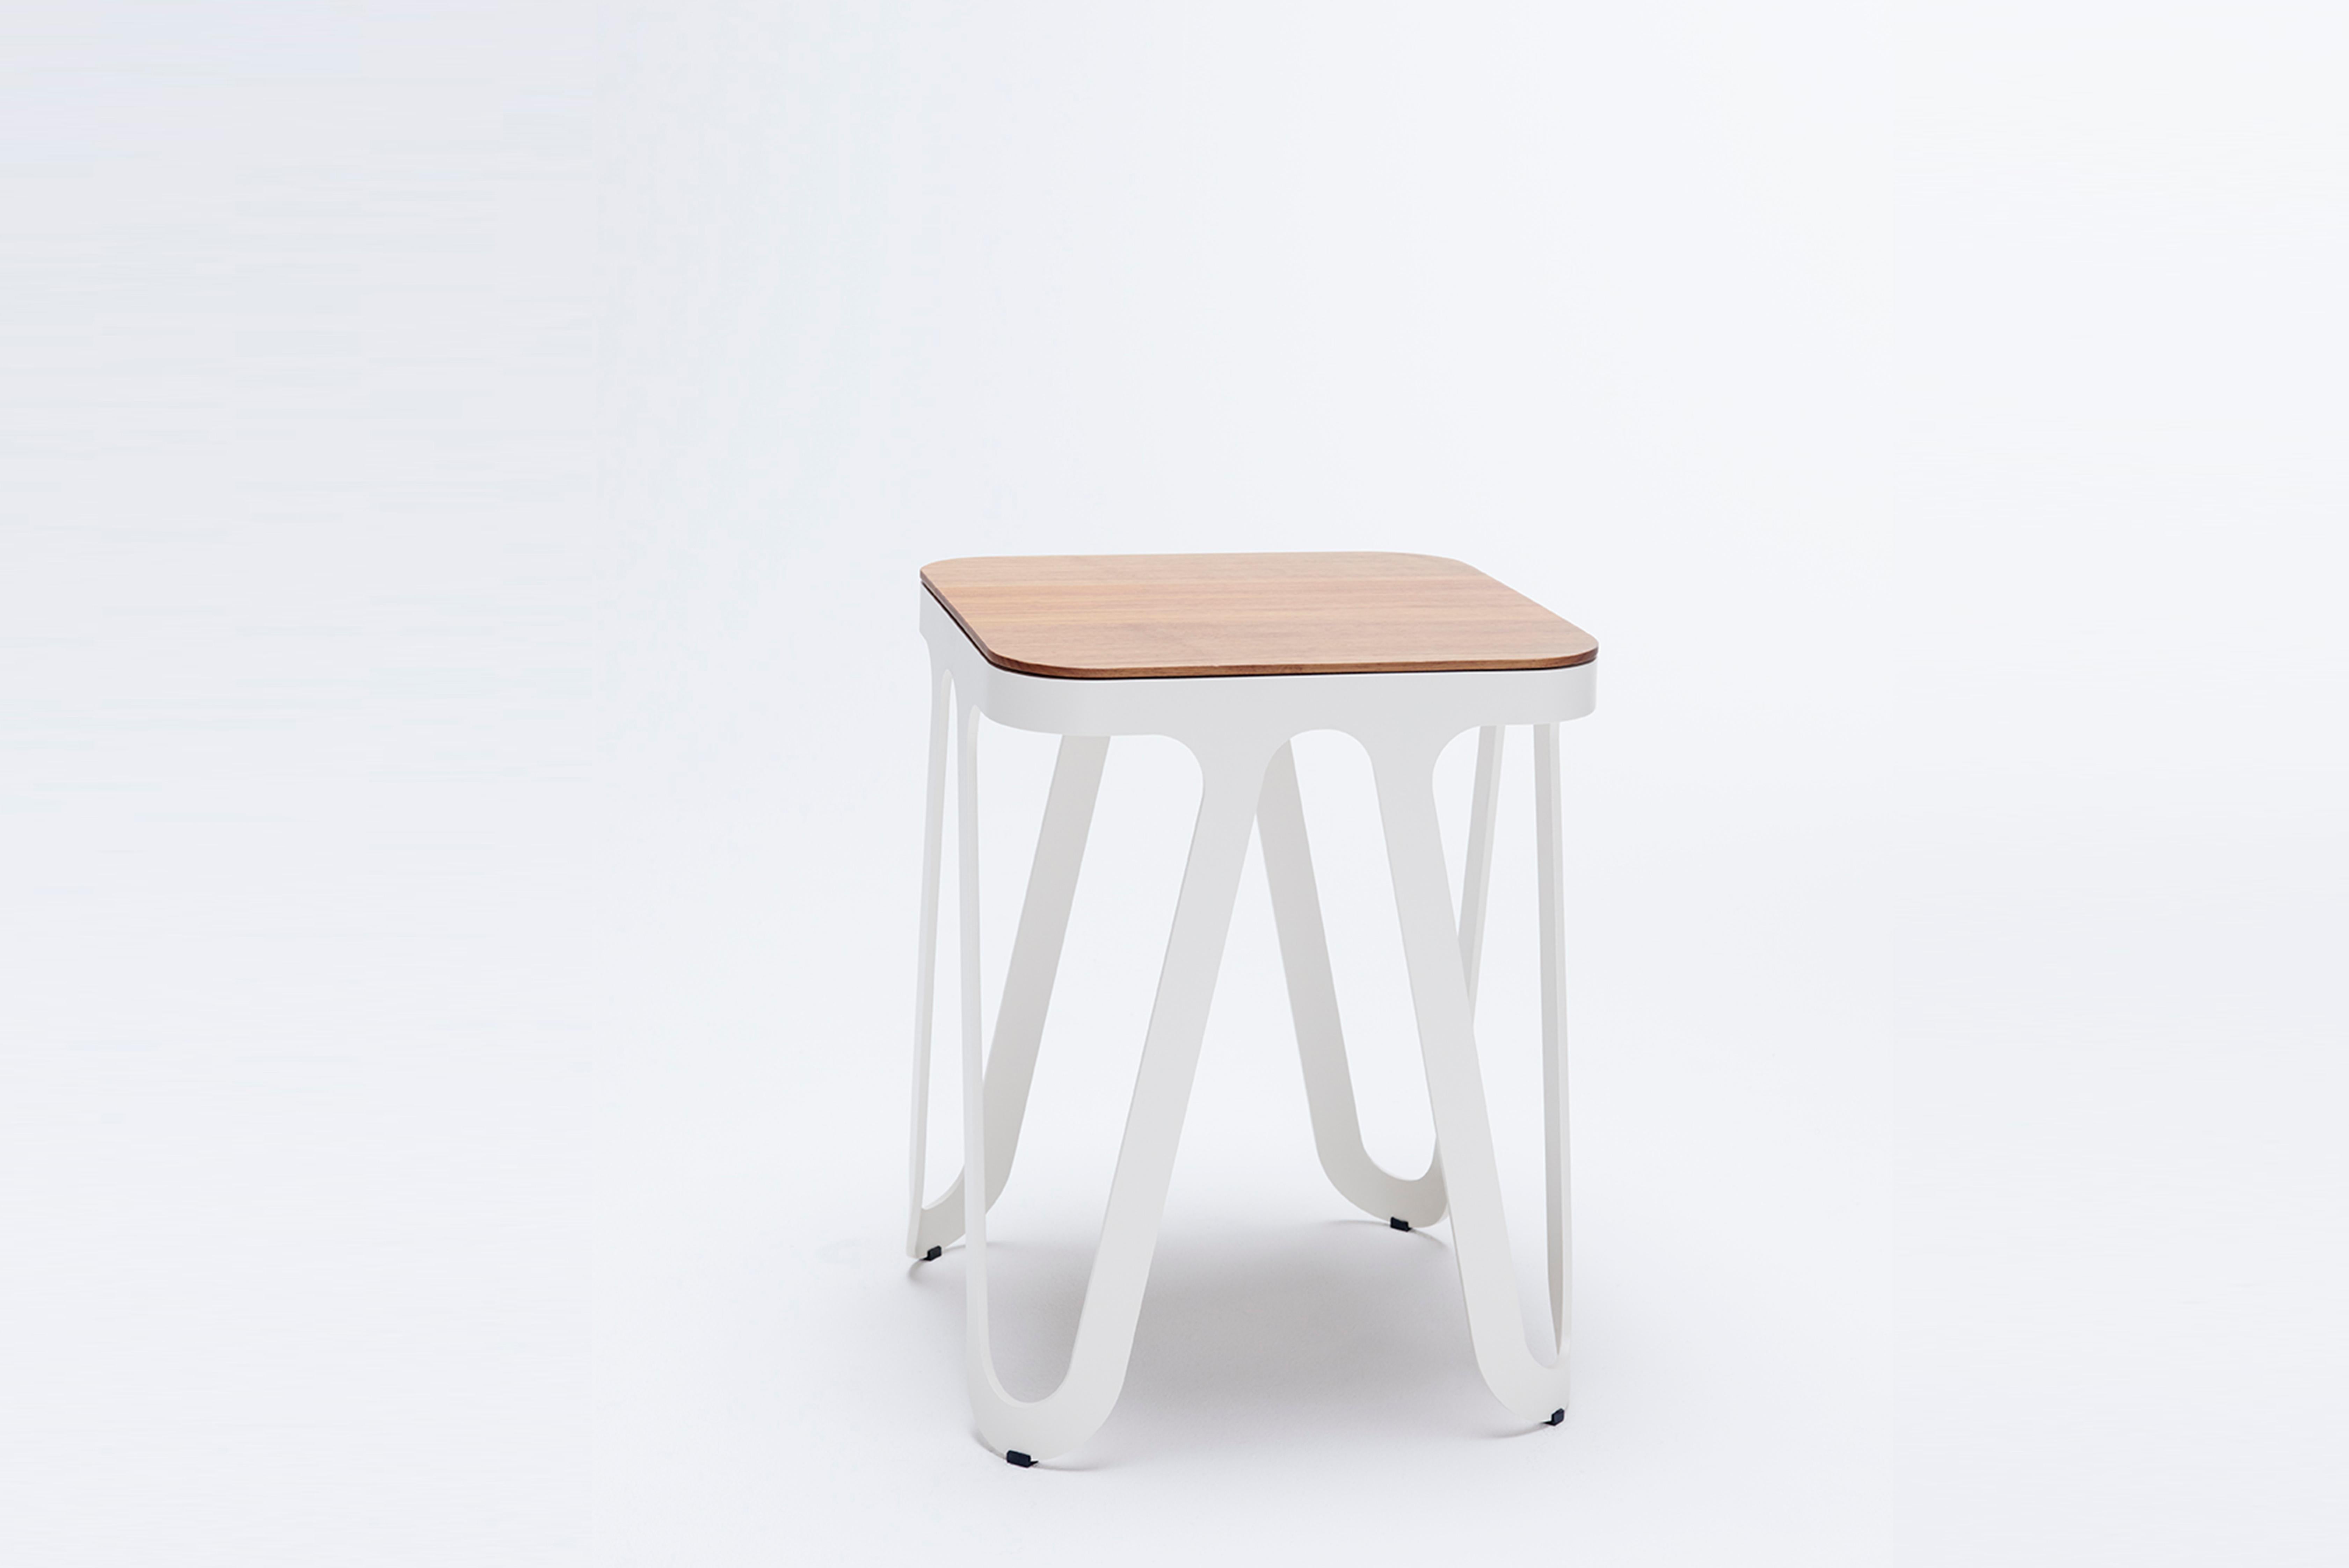 Walnut loop stool by Sebastian Scherer.
Dimensions: D38 x W38 x H45 cm.
Material: Aluminium, Solid Wood, Walnut.
Weight: 4.2 kg.
Also available in Aluminium, LOOP STOOL WOOD: solid wood (matt lacquered): black and white stained ash / natural oak